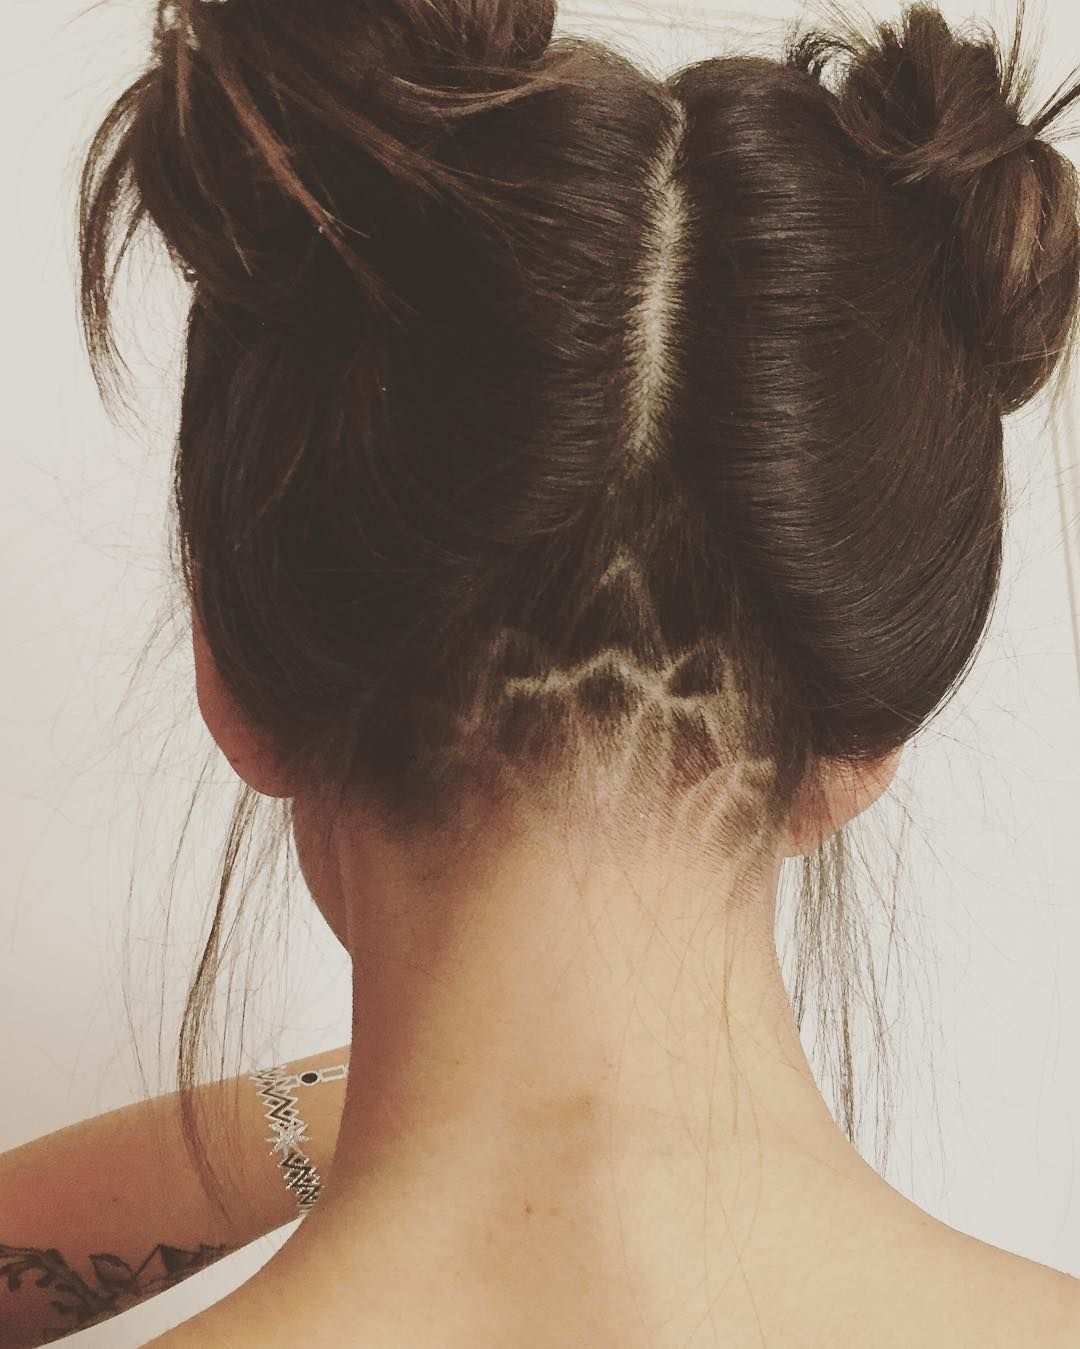 50 Adorable Undercut Hairstyles For Women Catch The Trend Check More At Http Hairstylezz Com Best U Undercut Long Hair Undercut Hairstyles Long Hair Styles